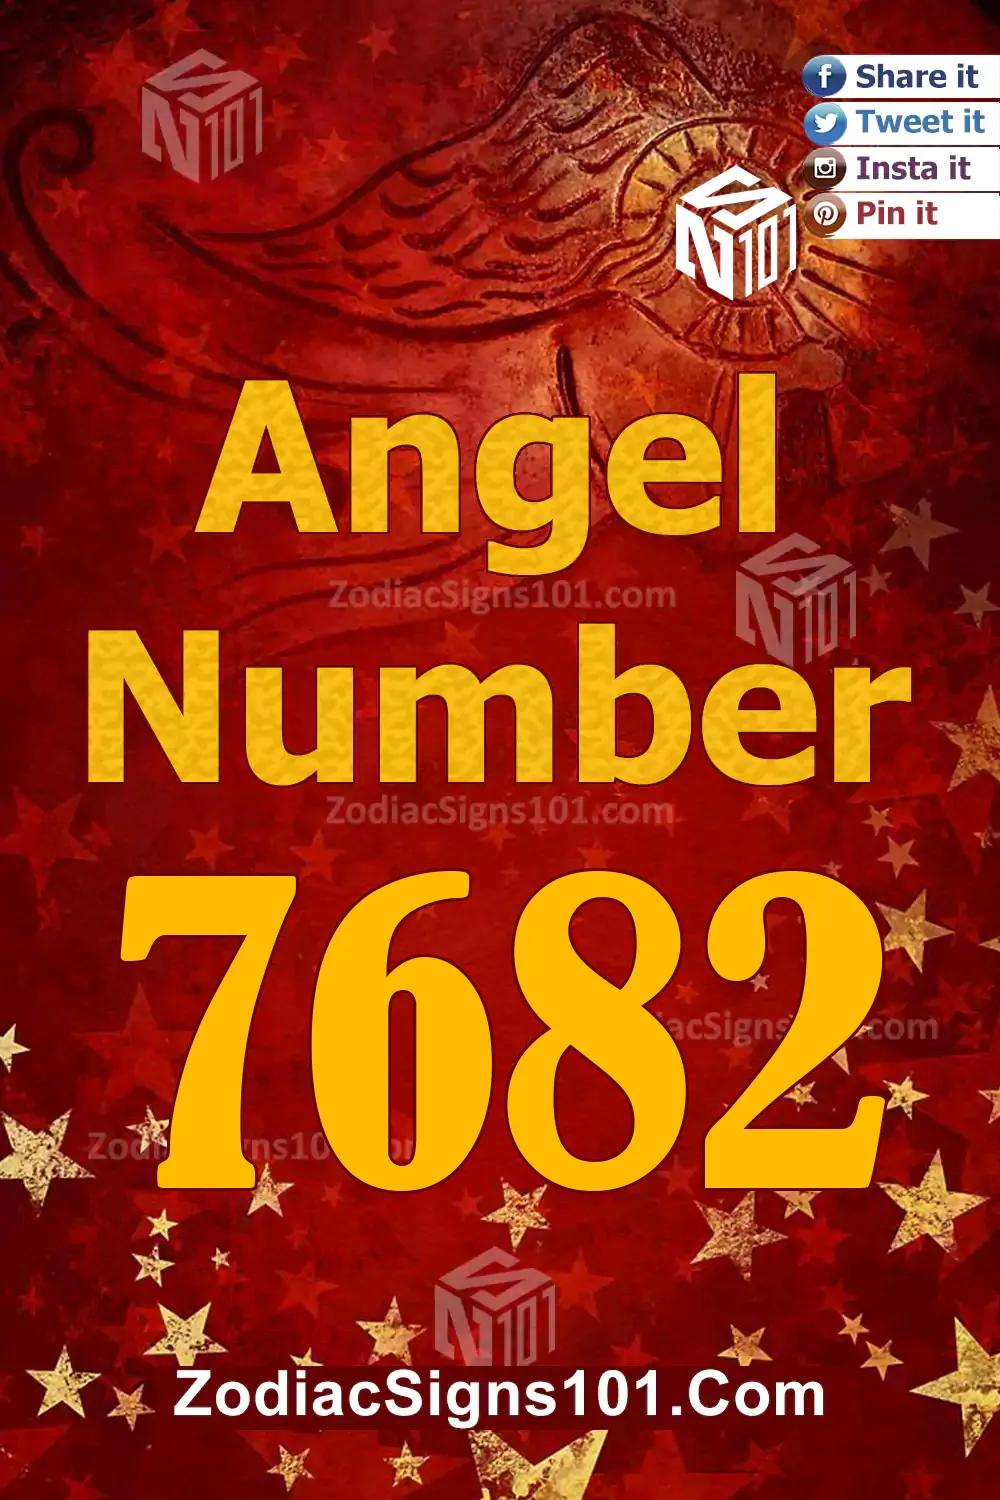 7682 Angel Number Meaning